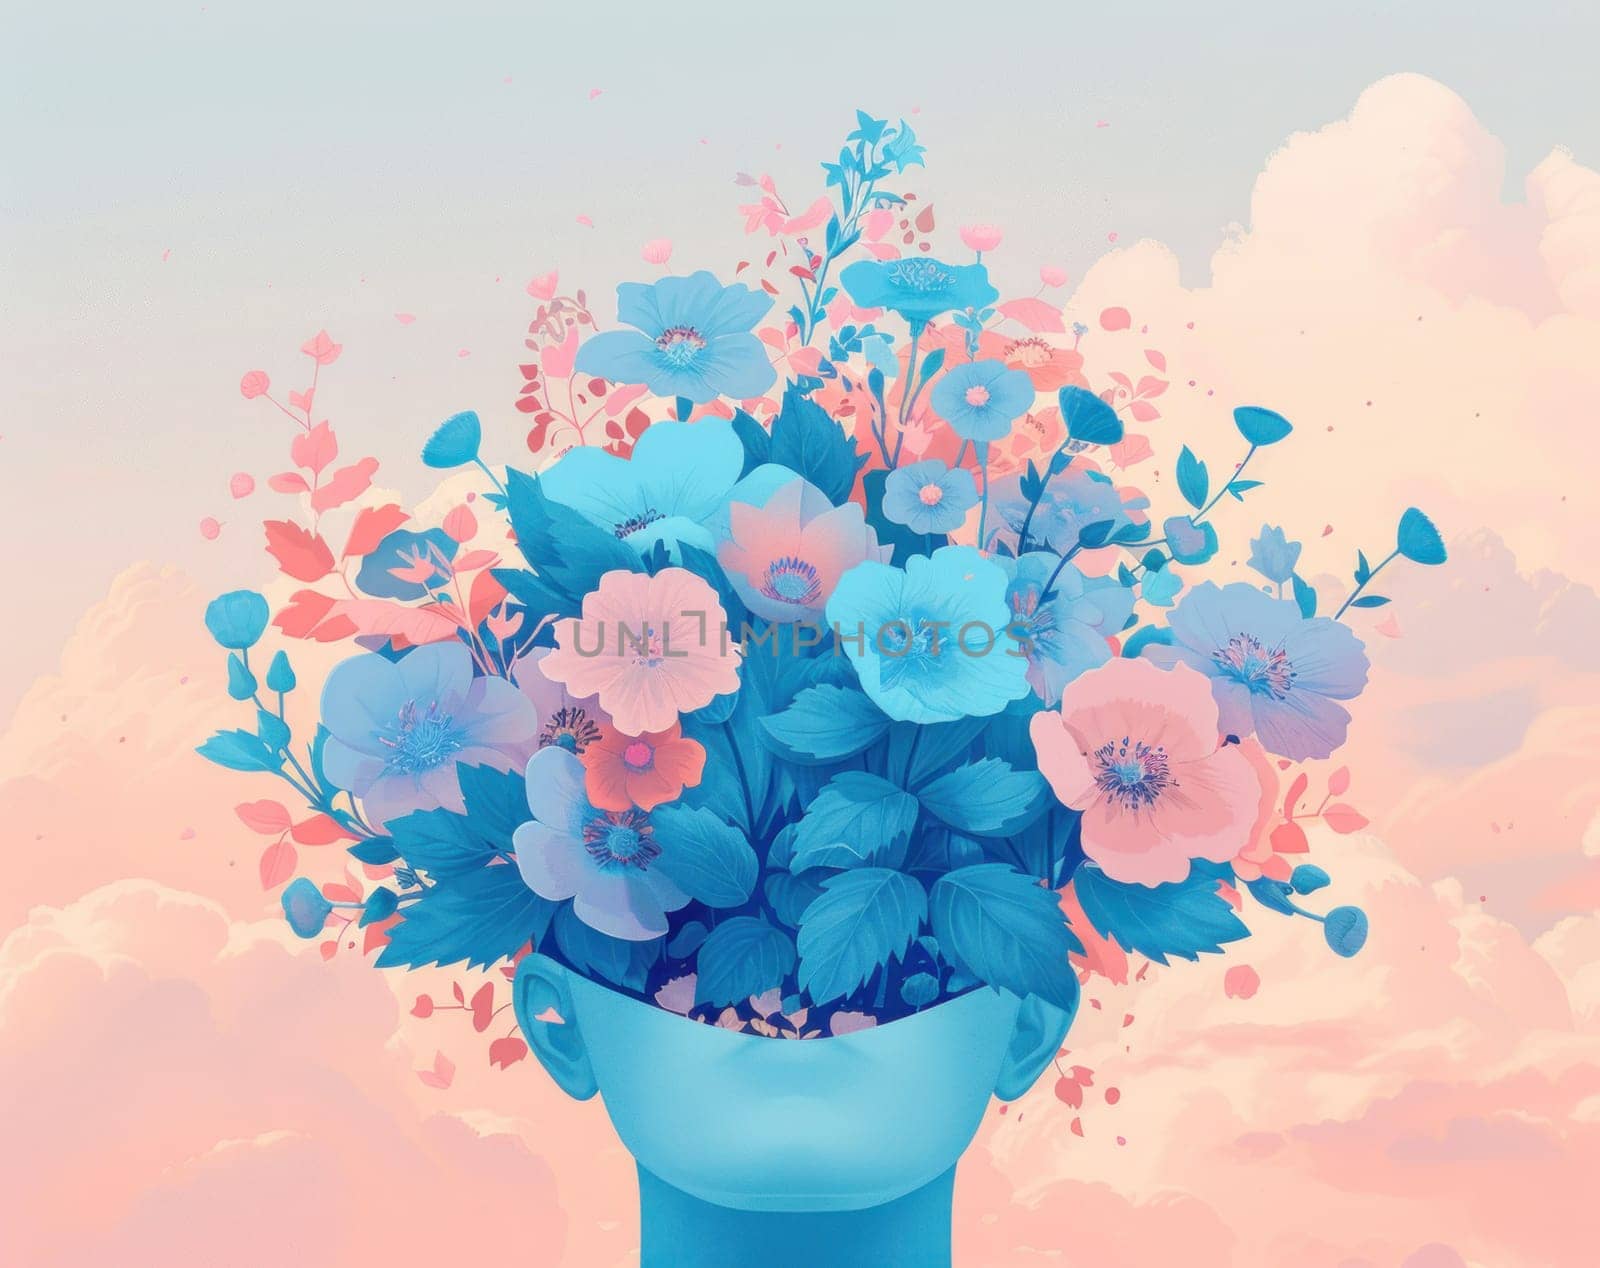 Floral fantasy woman's head filled with blue and pink flowers in the shape of a flower